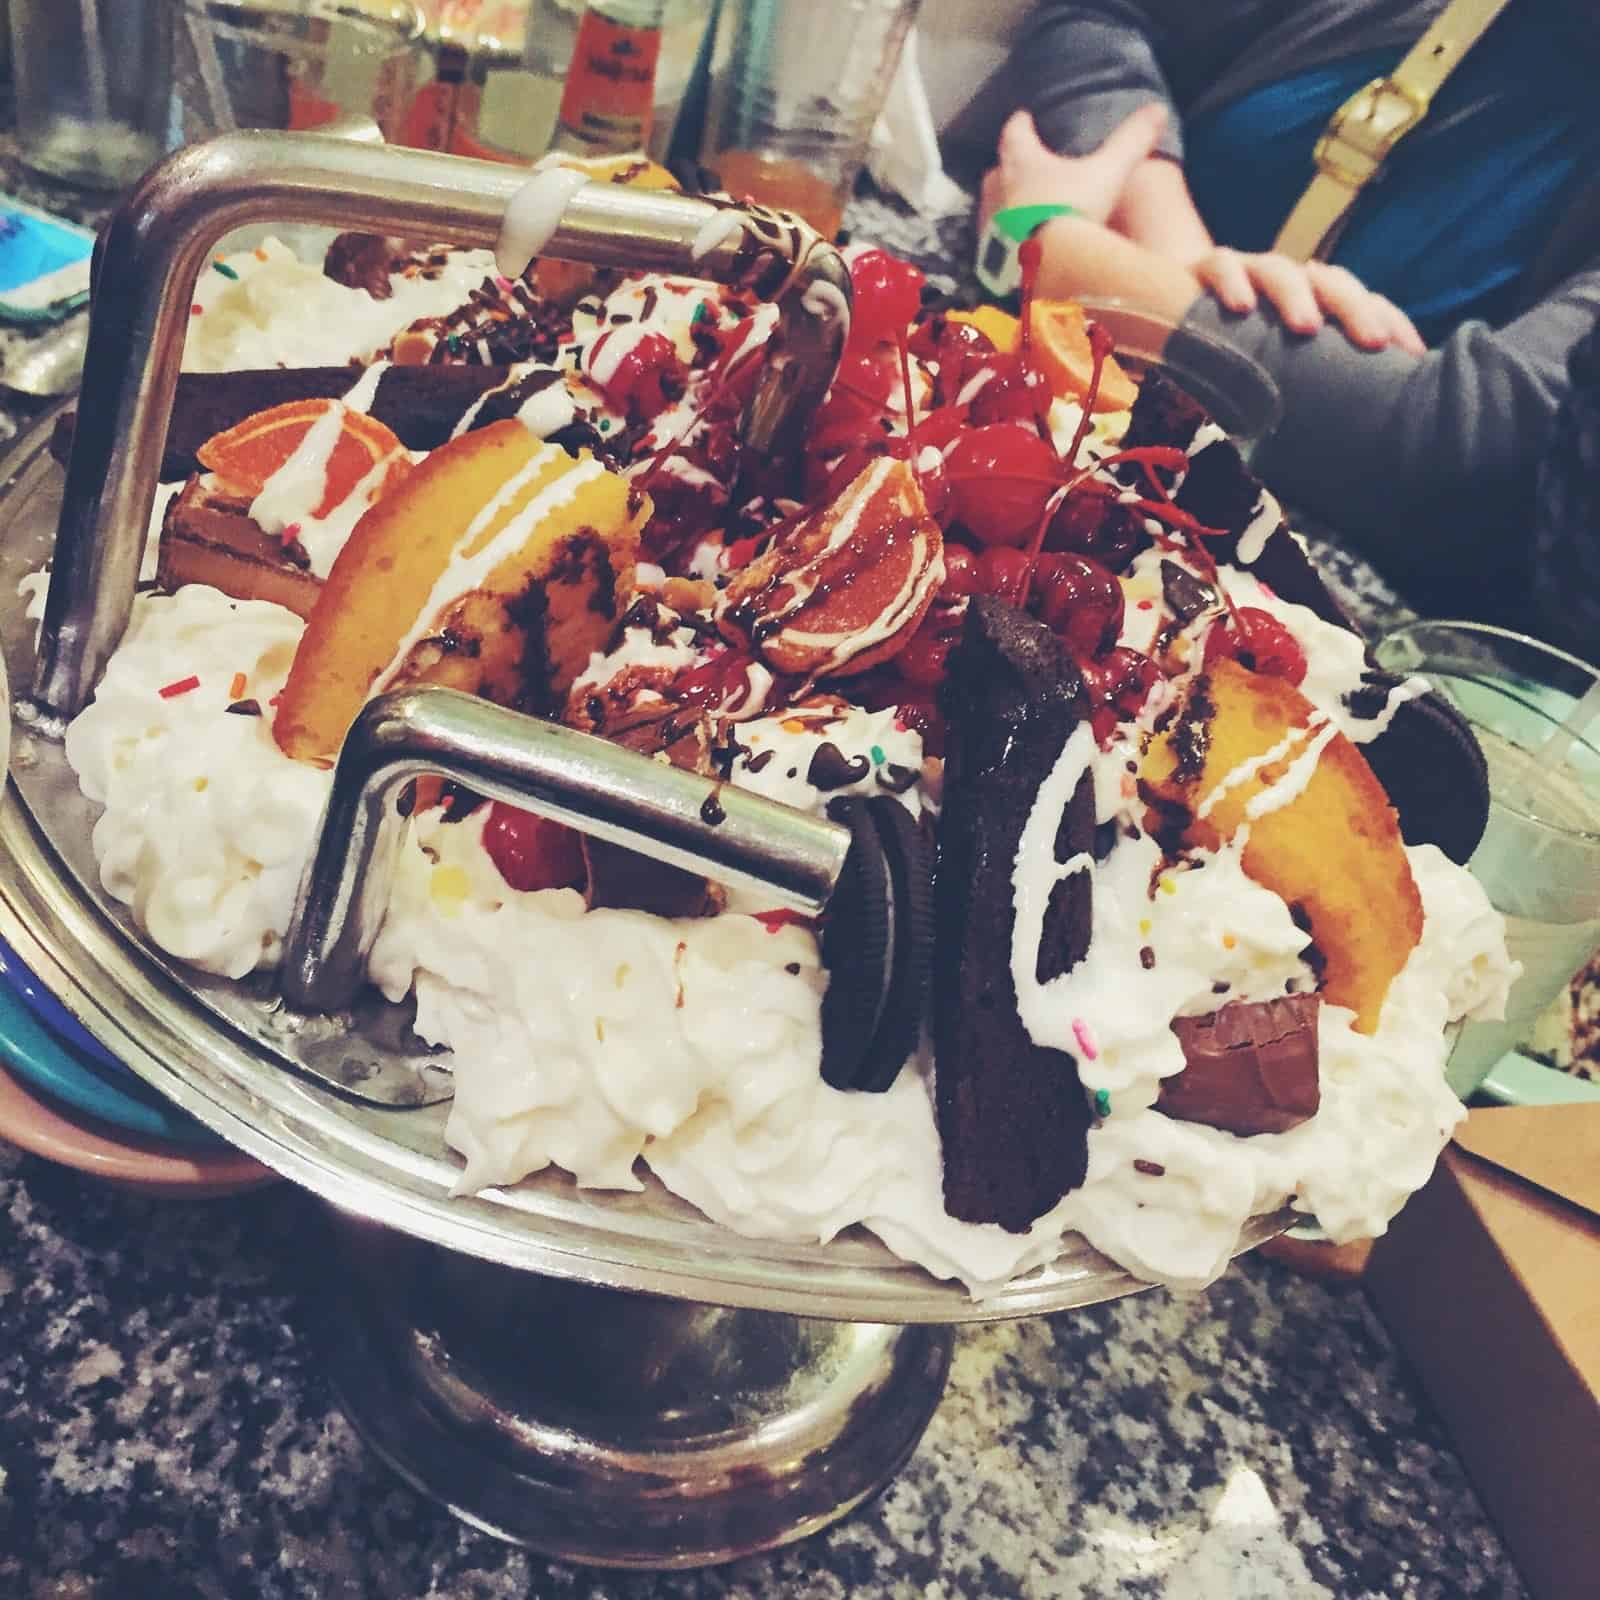 Kitchen Sink from Beaches and Cream